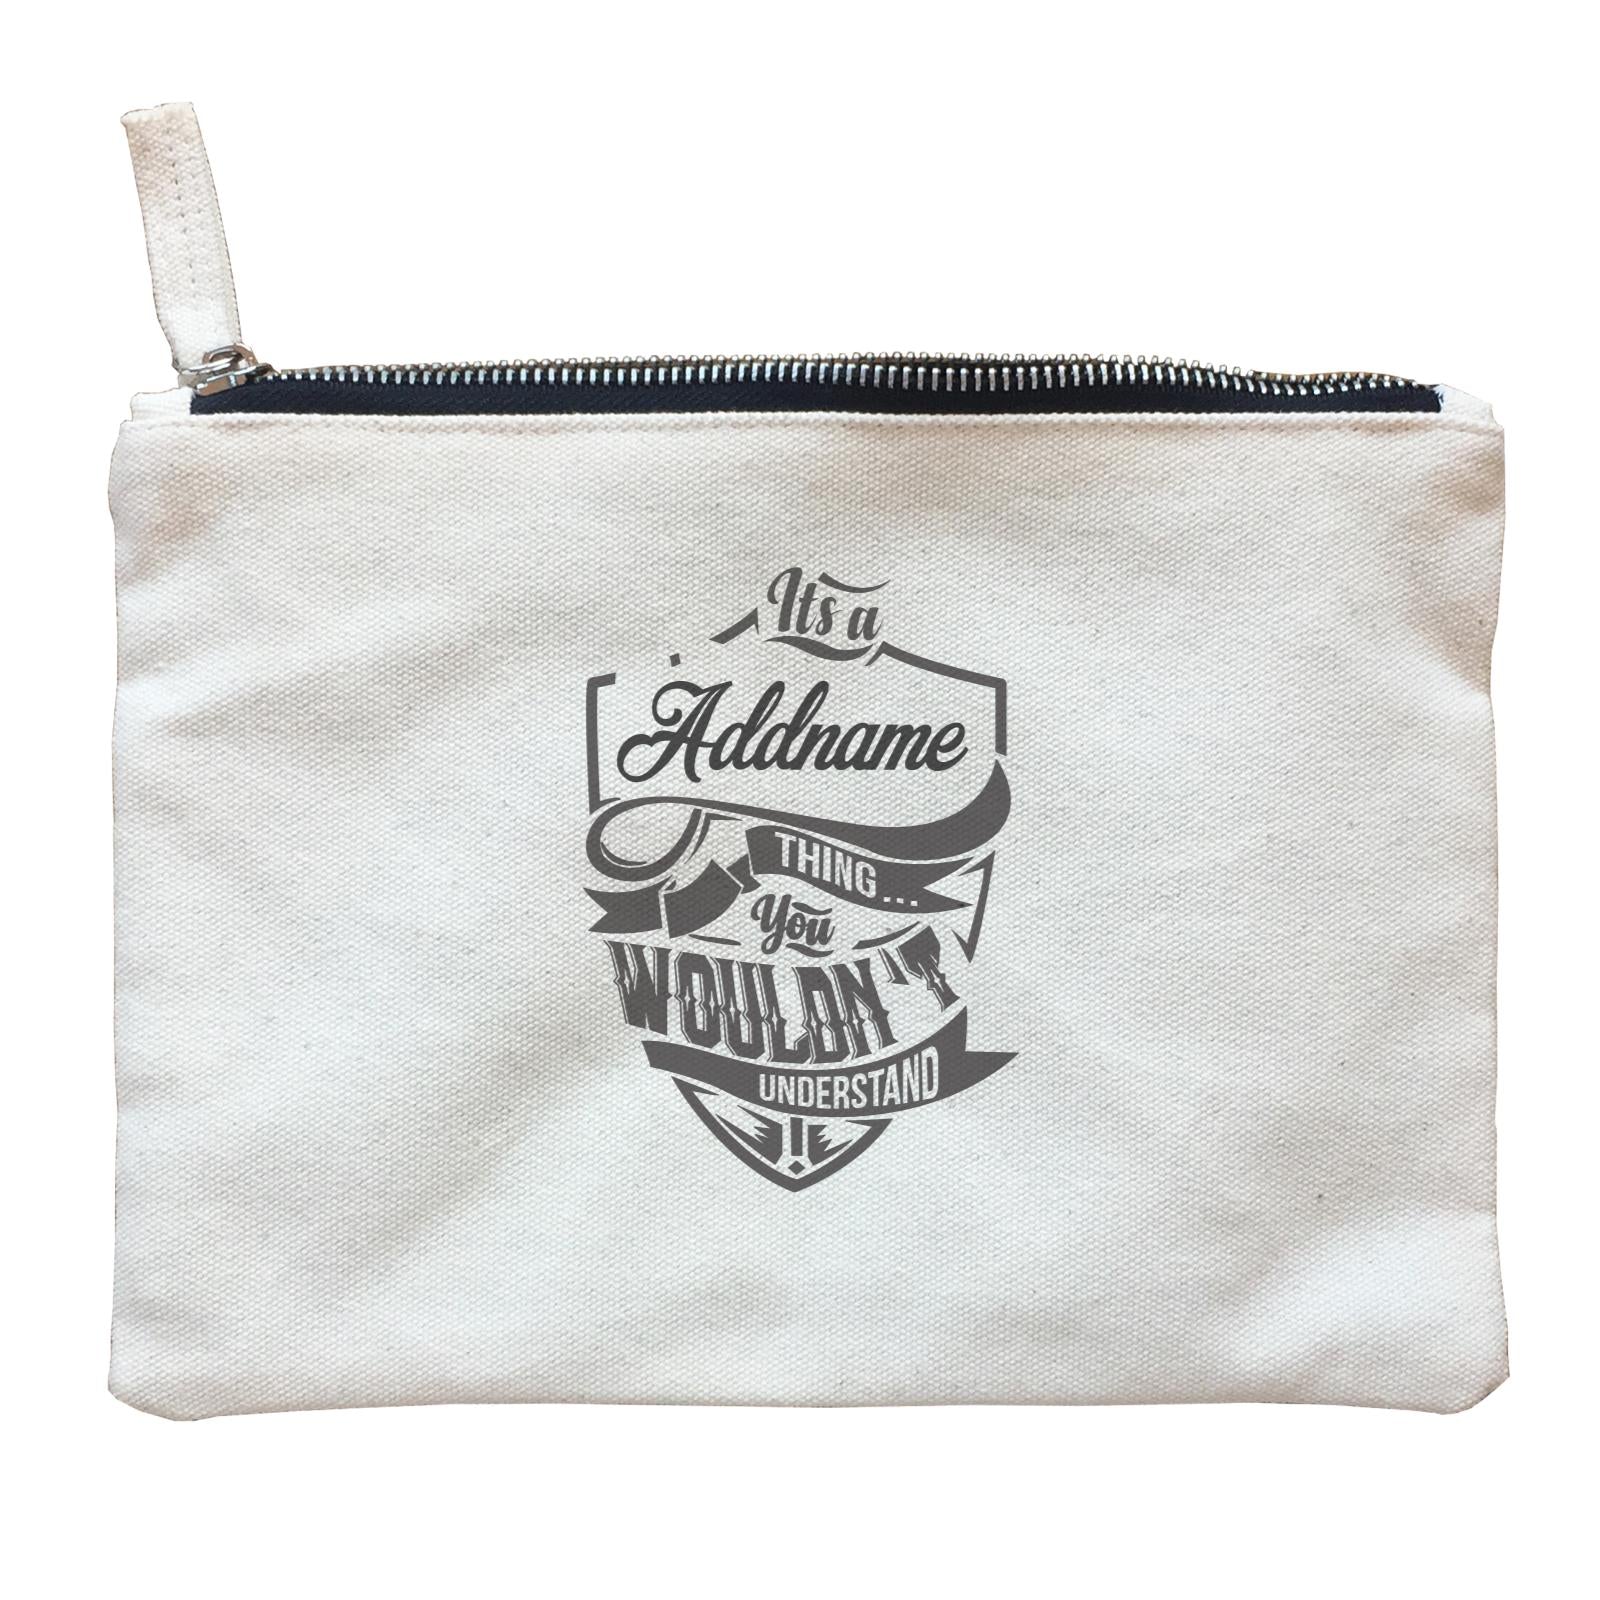 Personalize It Awesome It's A Thing You Wouldn't Understand with Addname Zipper Pouch